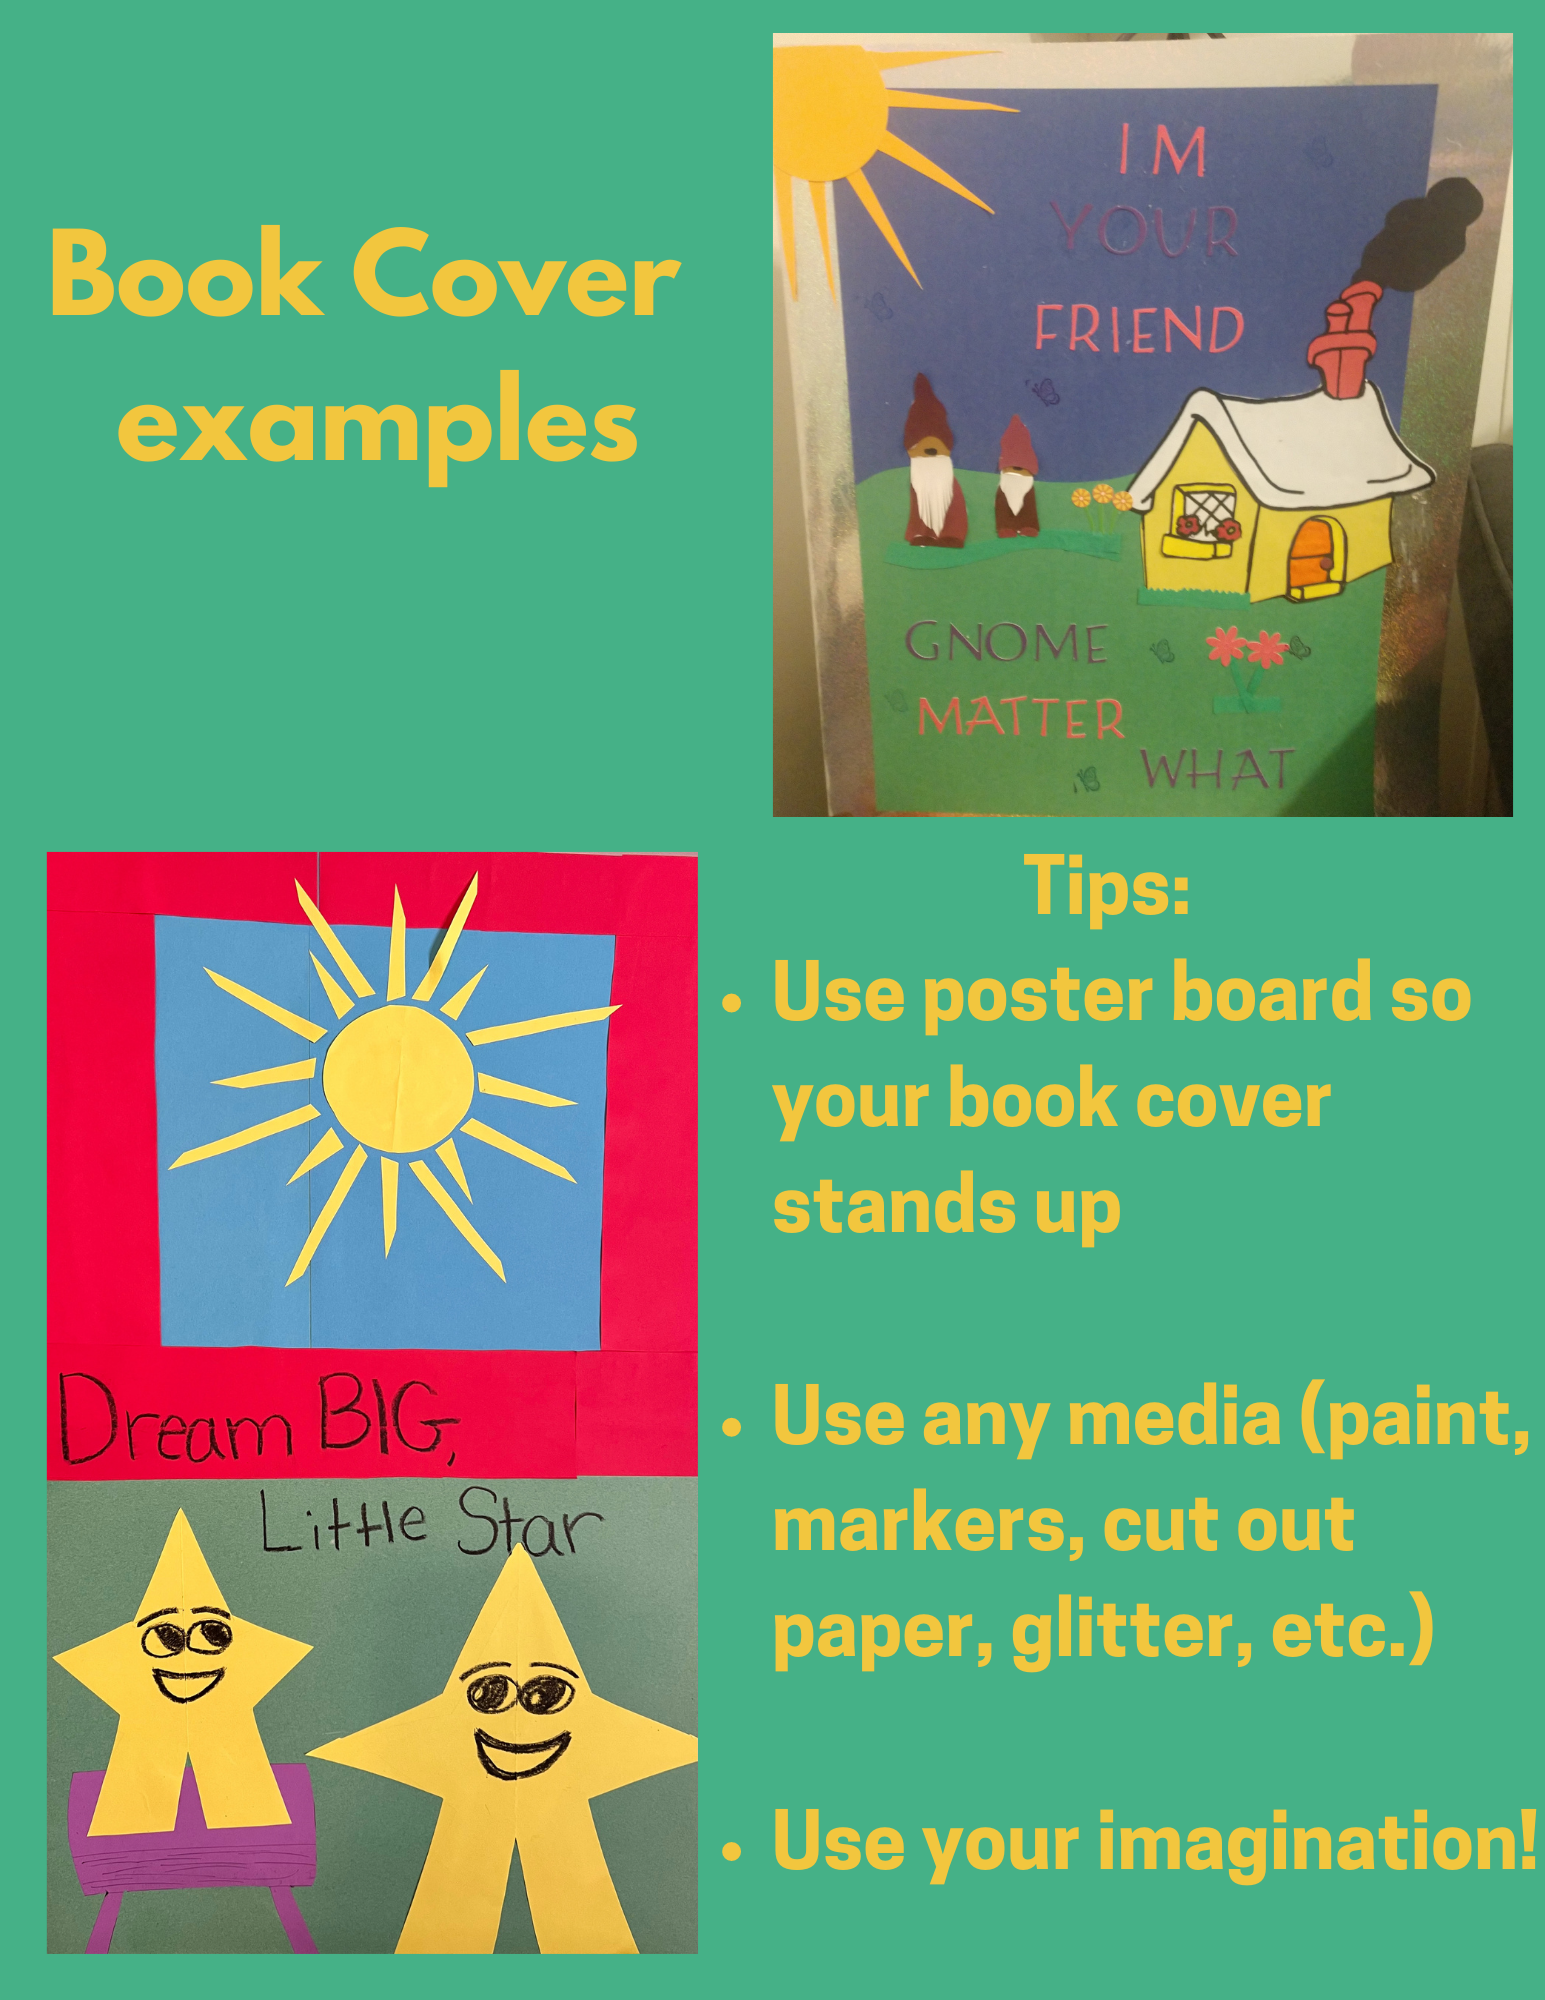 Book Cover examples